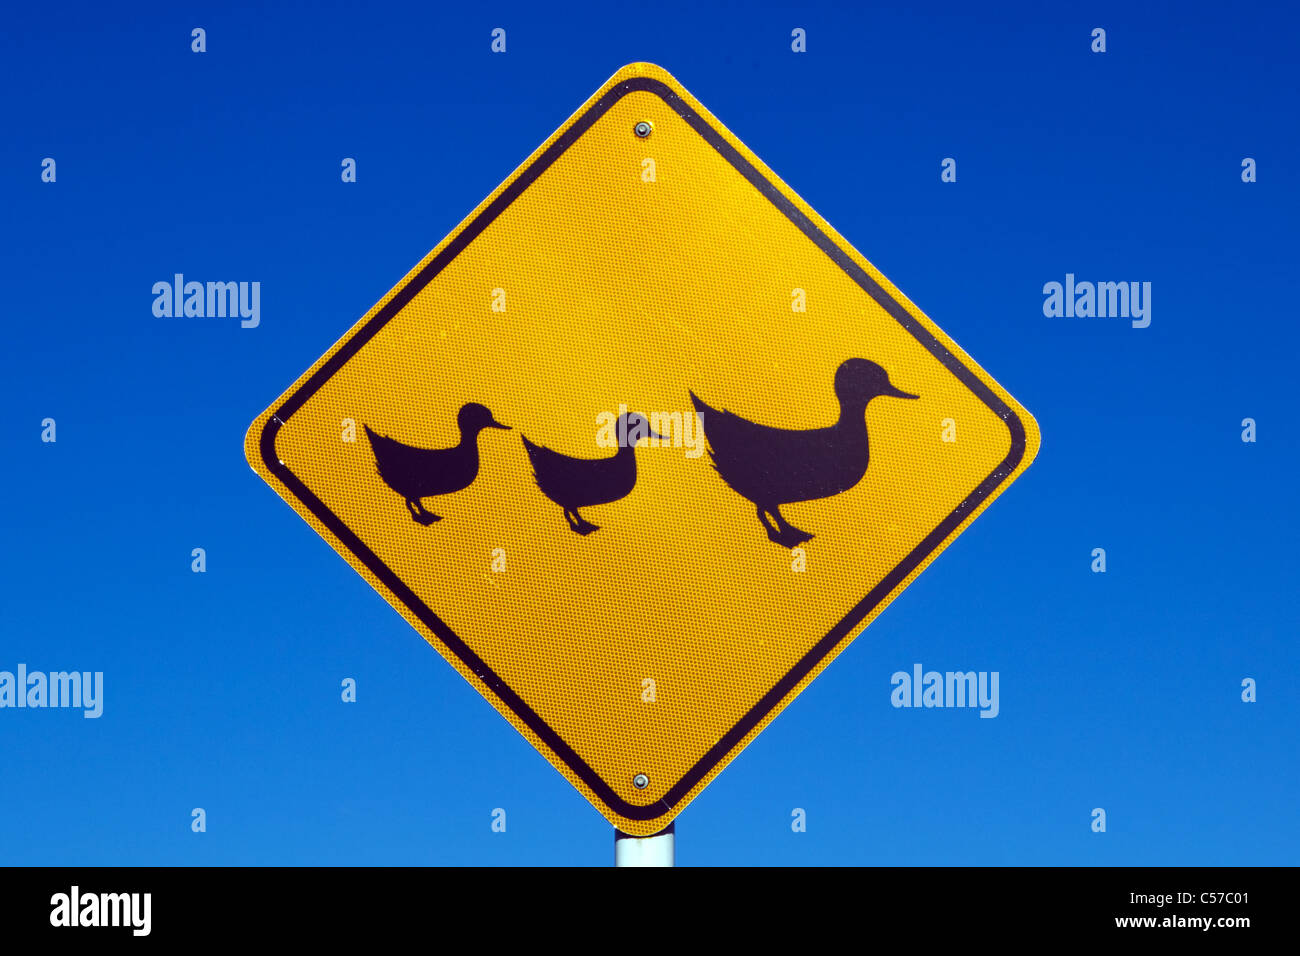 Traffic Sign, ducks crossing, Auckland, New Zealand, Monday, July 11, 2011. Stock Photo